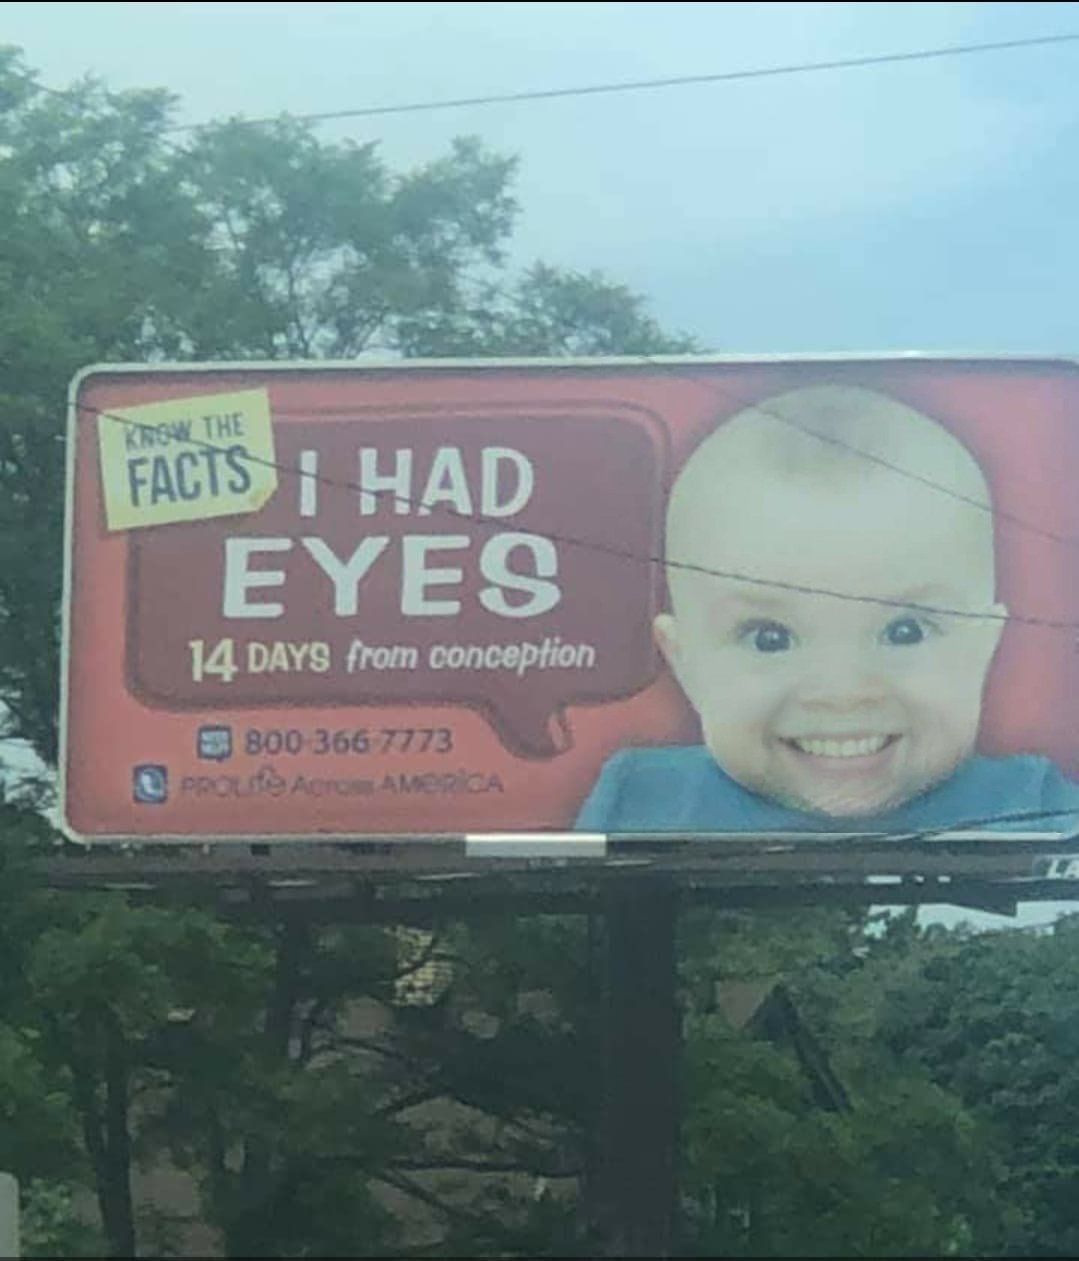 The Terrifyingly Toothy Baby on this Pro-life Billboard.